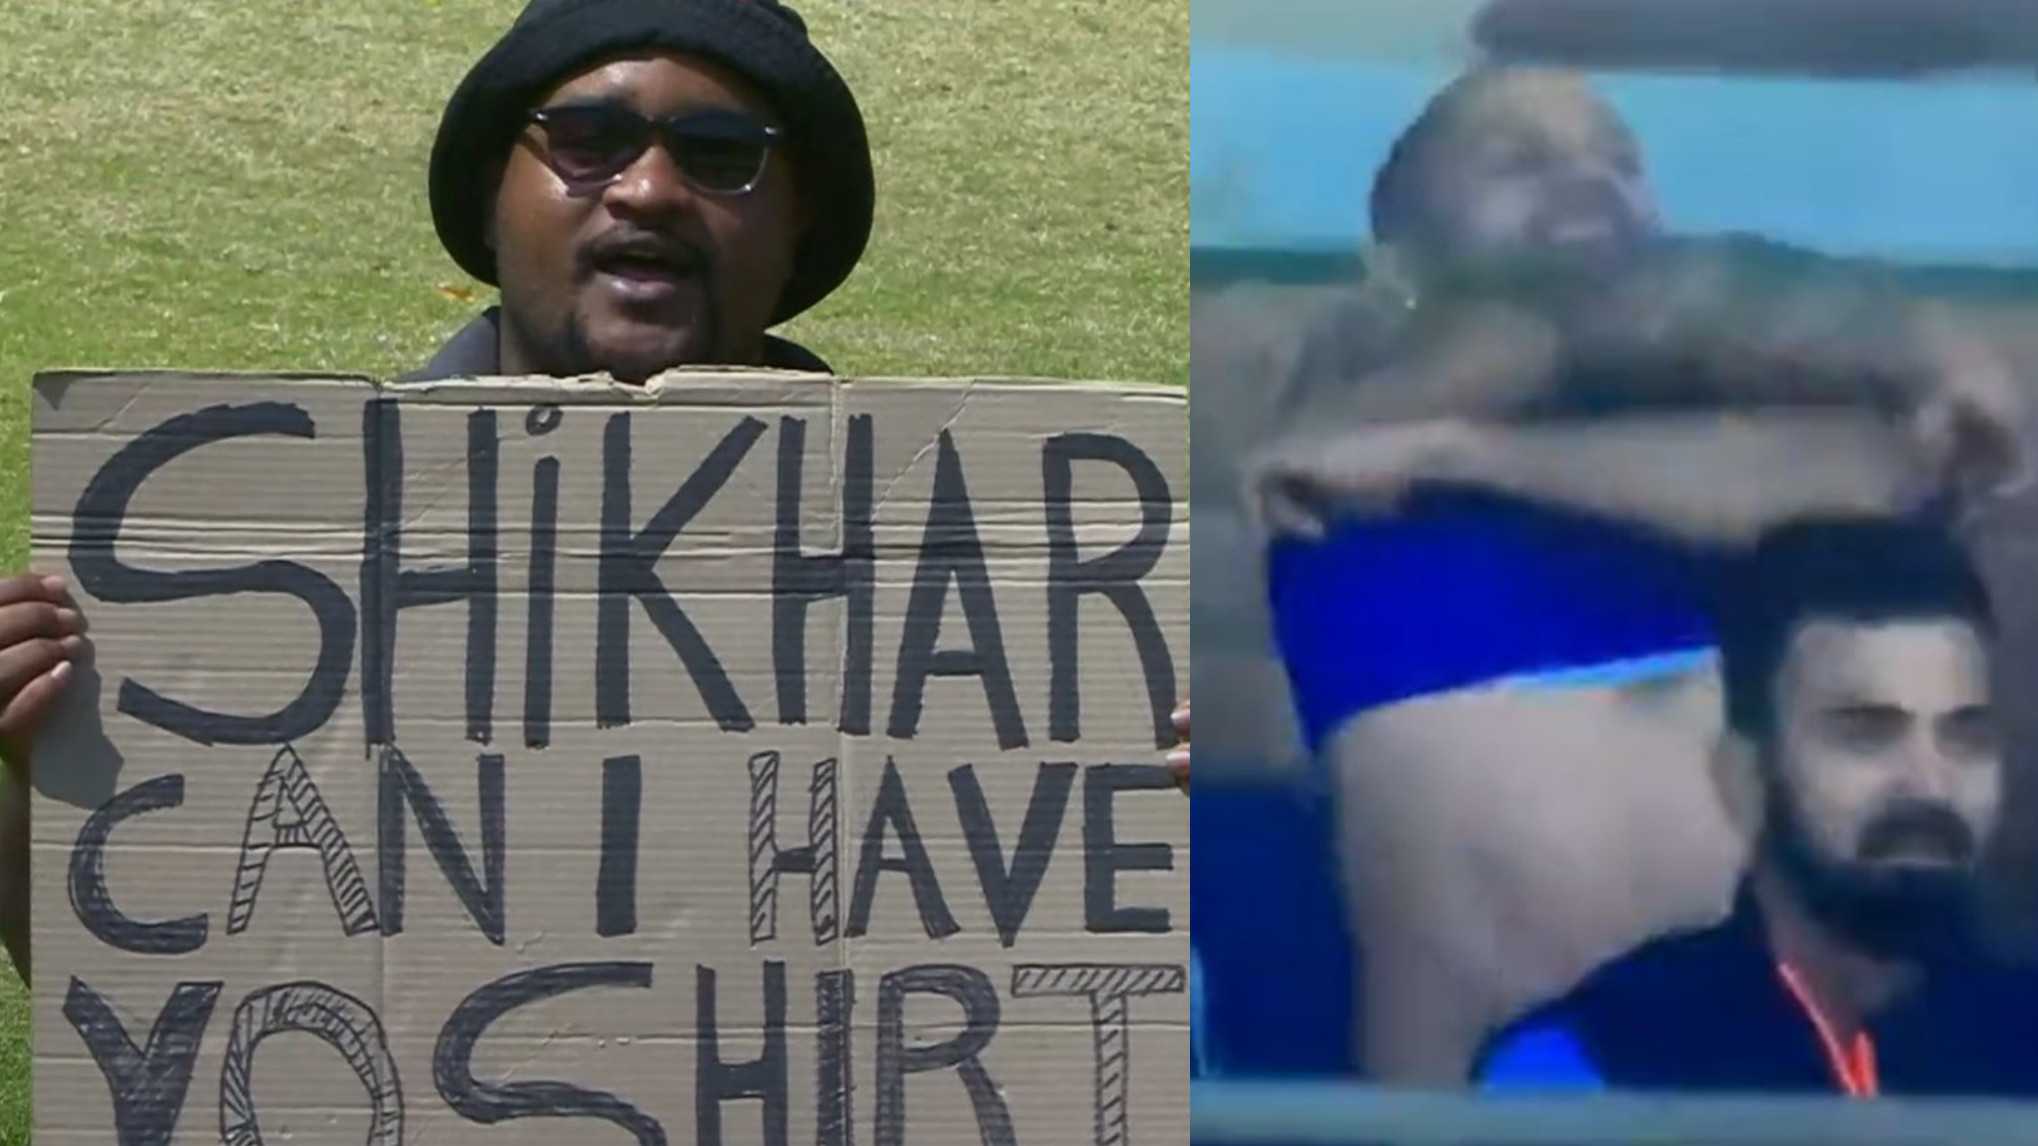 ZIM v IND 2022: WATCH- Shikhar Dhawan’s hilarious reaction to a fan asking for his shirt